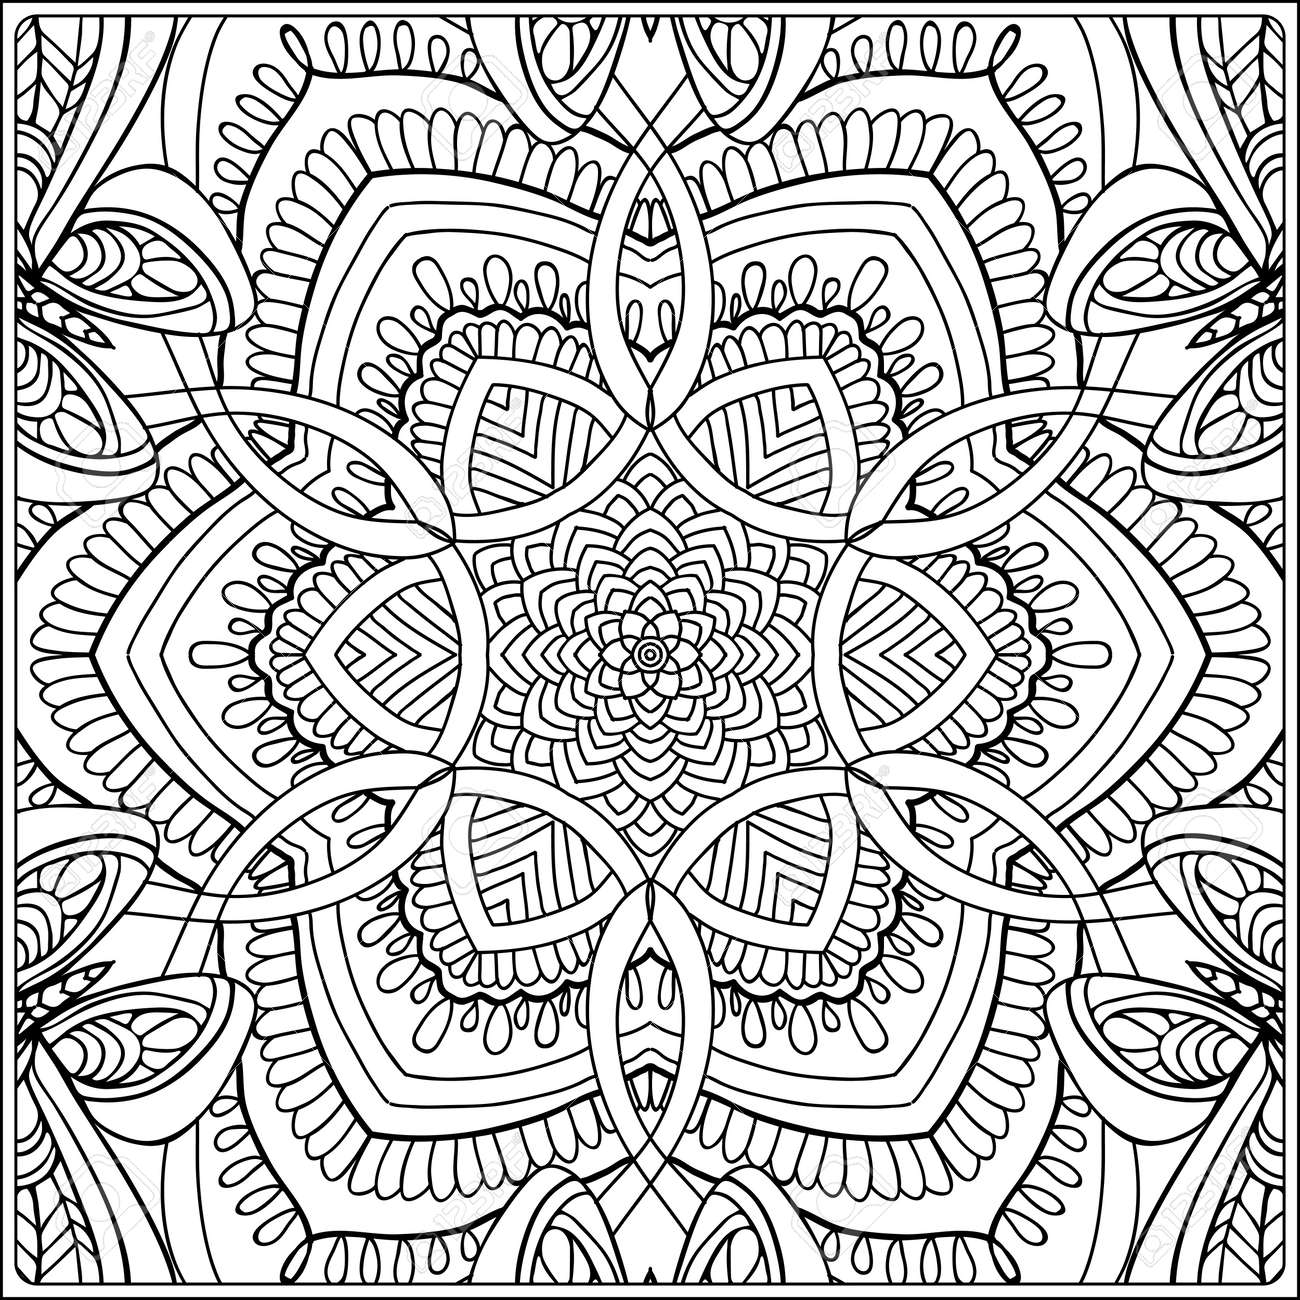 Seamless pattern outline hand drawing good for coloring page for the adult coloring book stock vector illustrationabstract vector decorative ethnic mandala black and white royalty free svg cliparts vectors and stock illustration